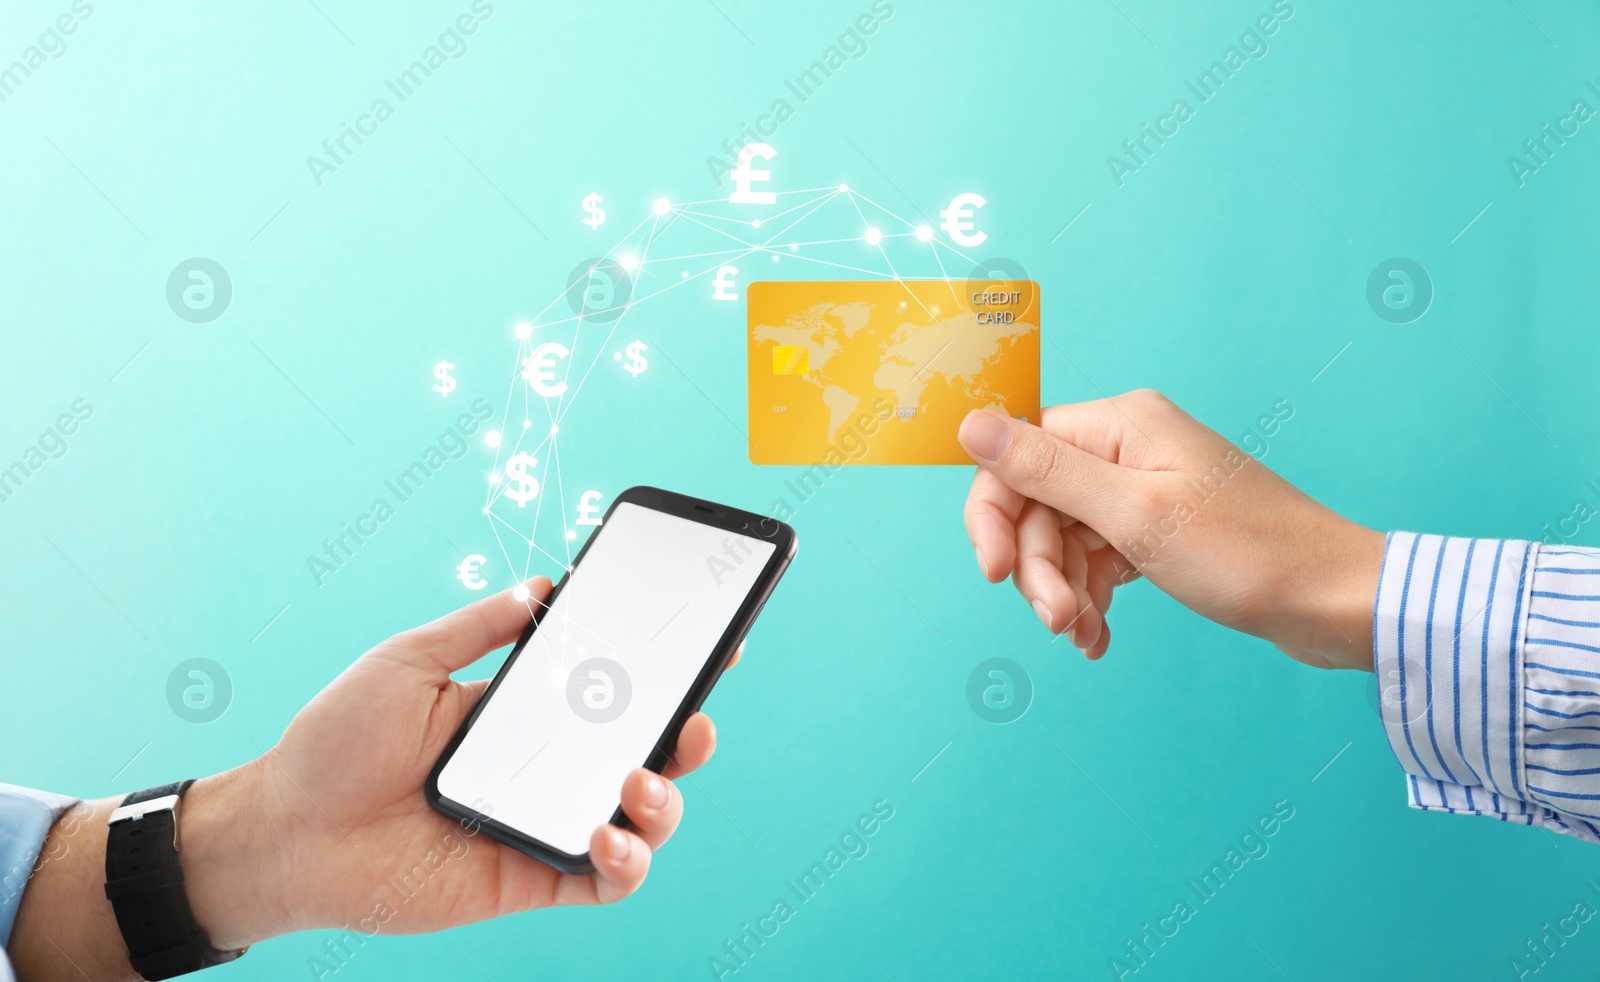 Image of Fintech concept. Man using phone to make financial transactions with credit card